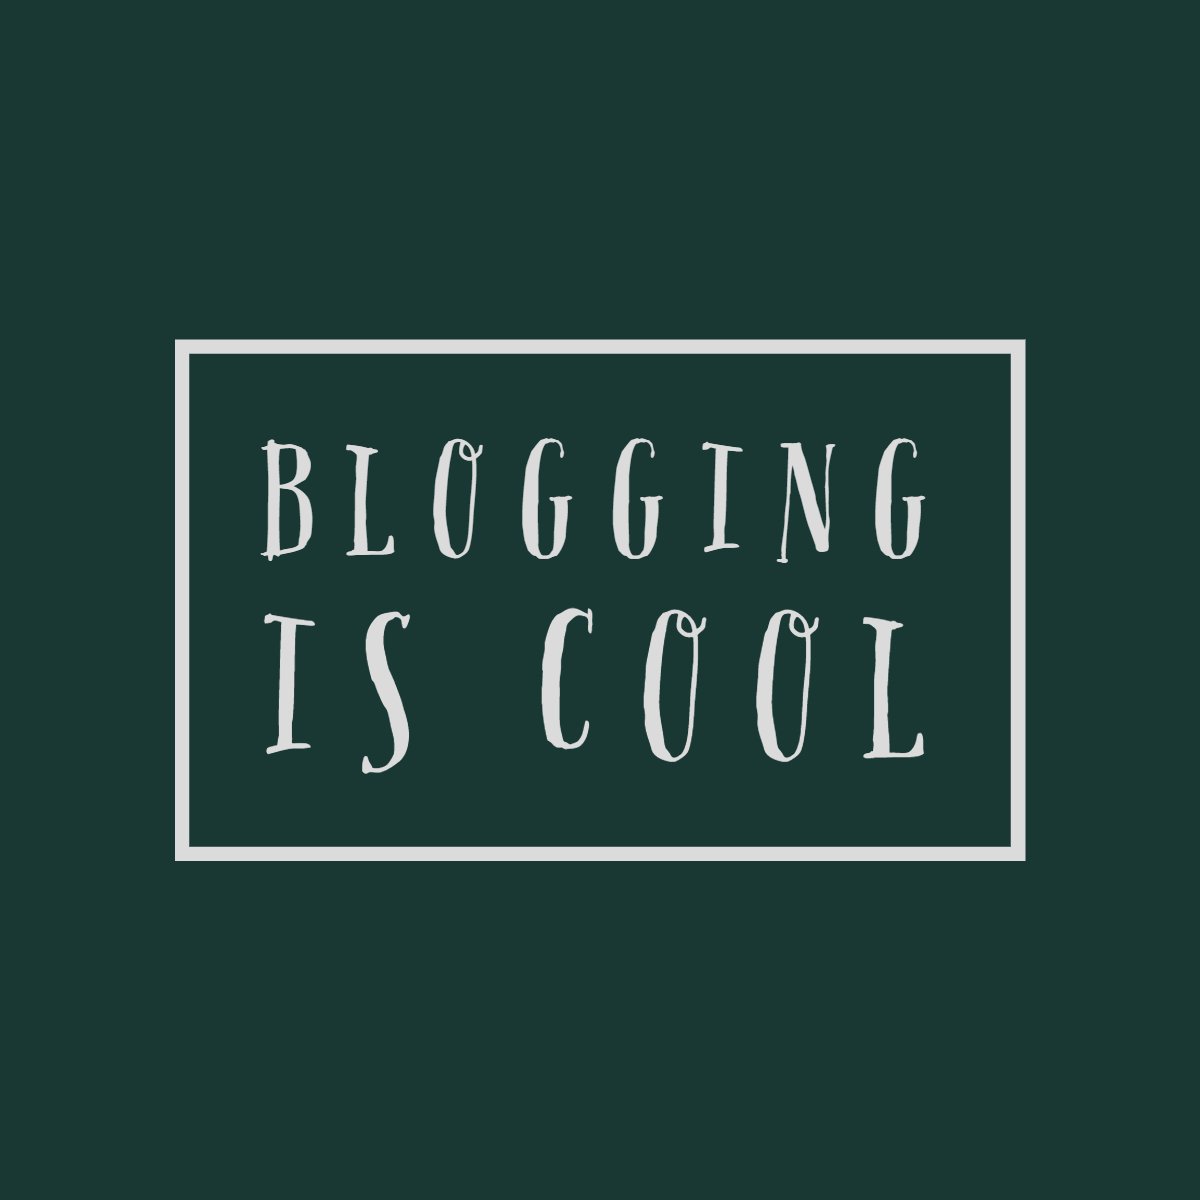 When Blogging Becomes a Slog: Tips to Make it More Delightful